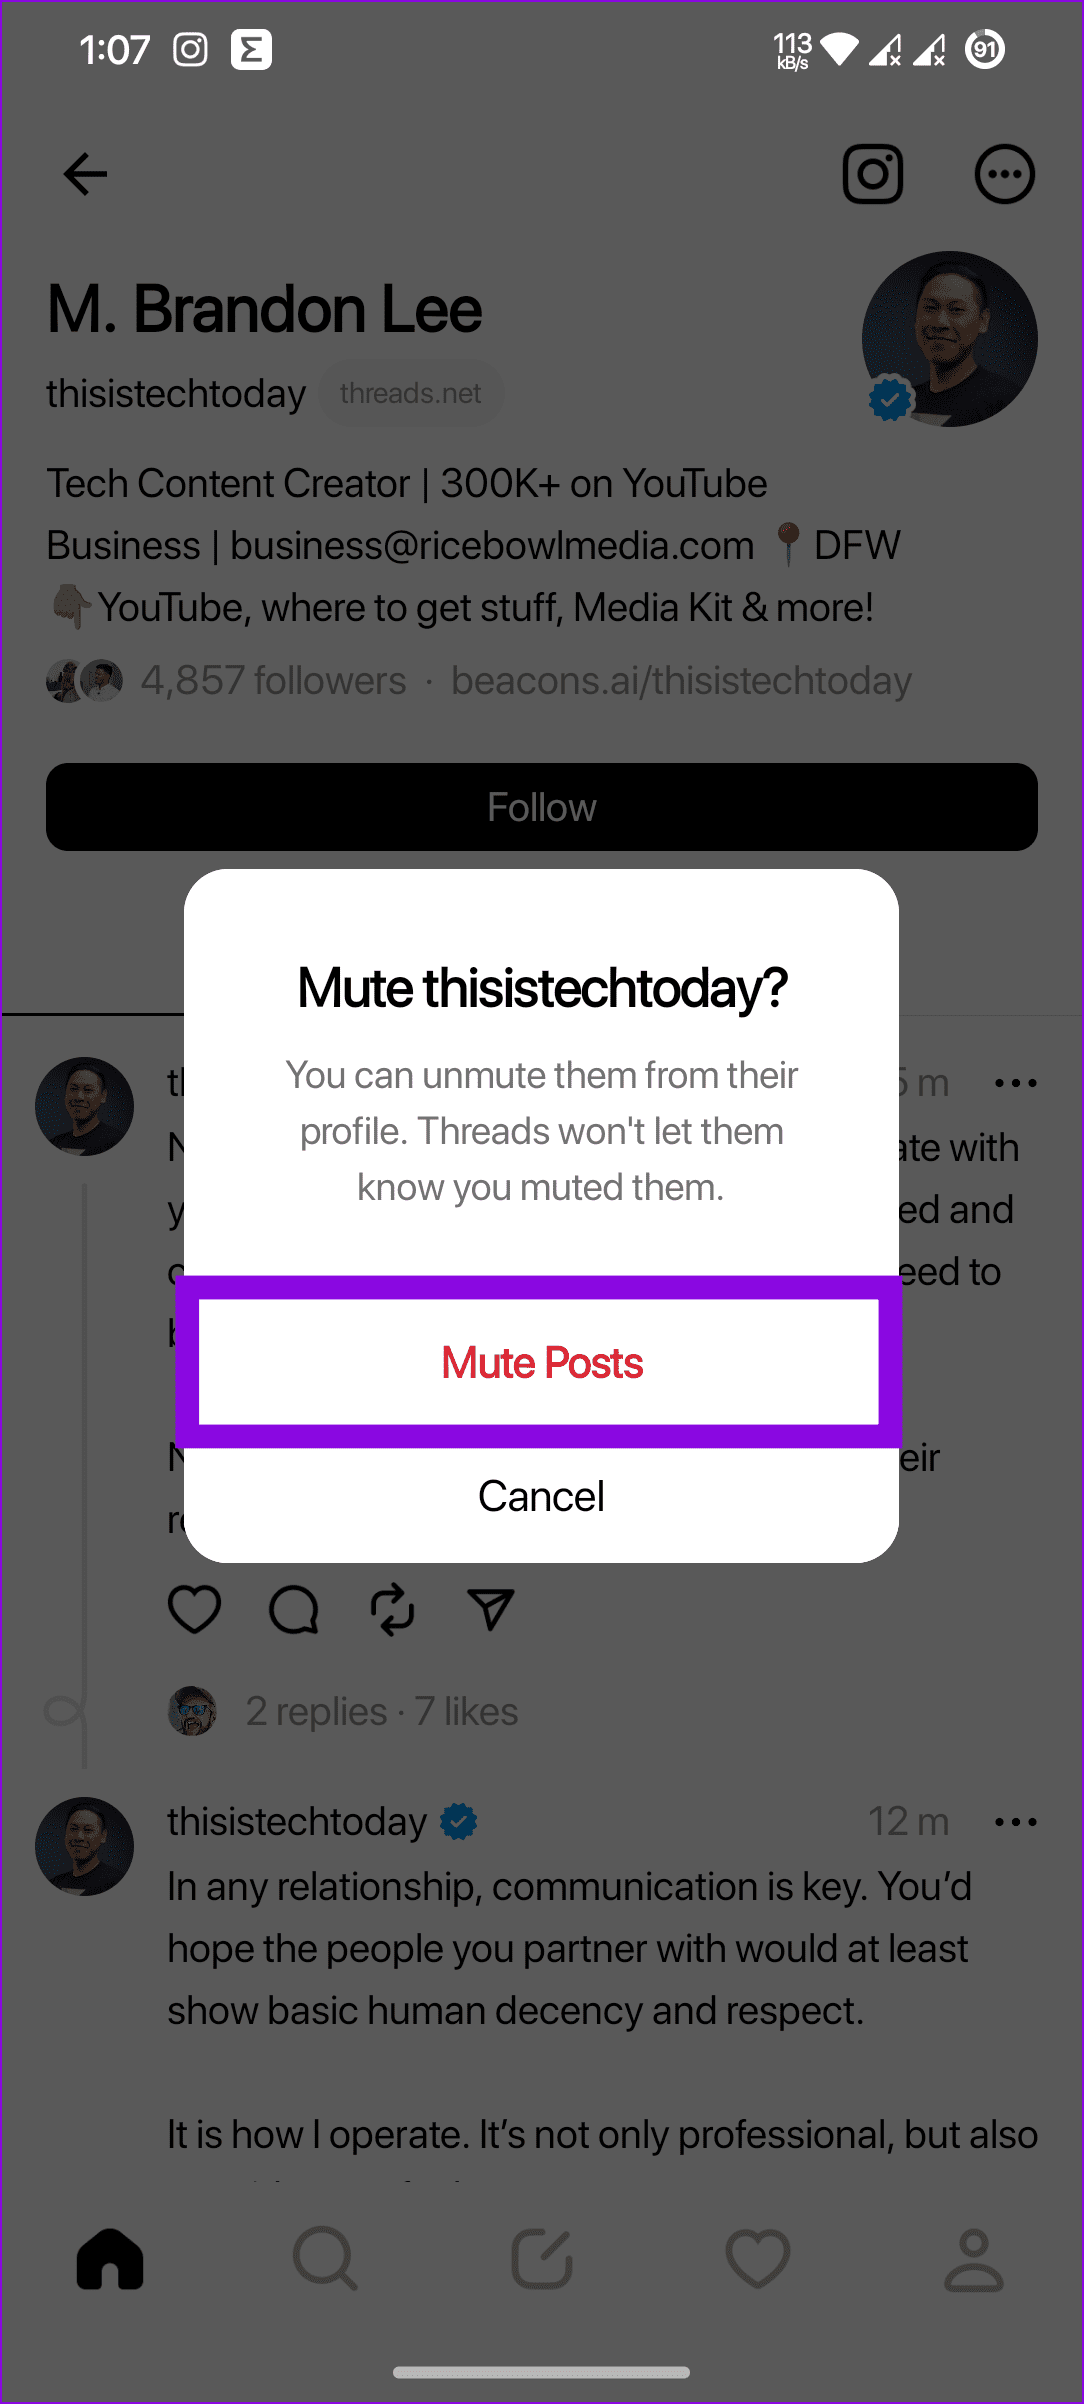 choose mute posts to confirm